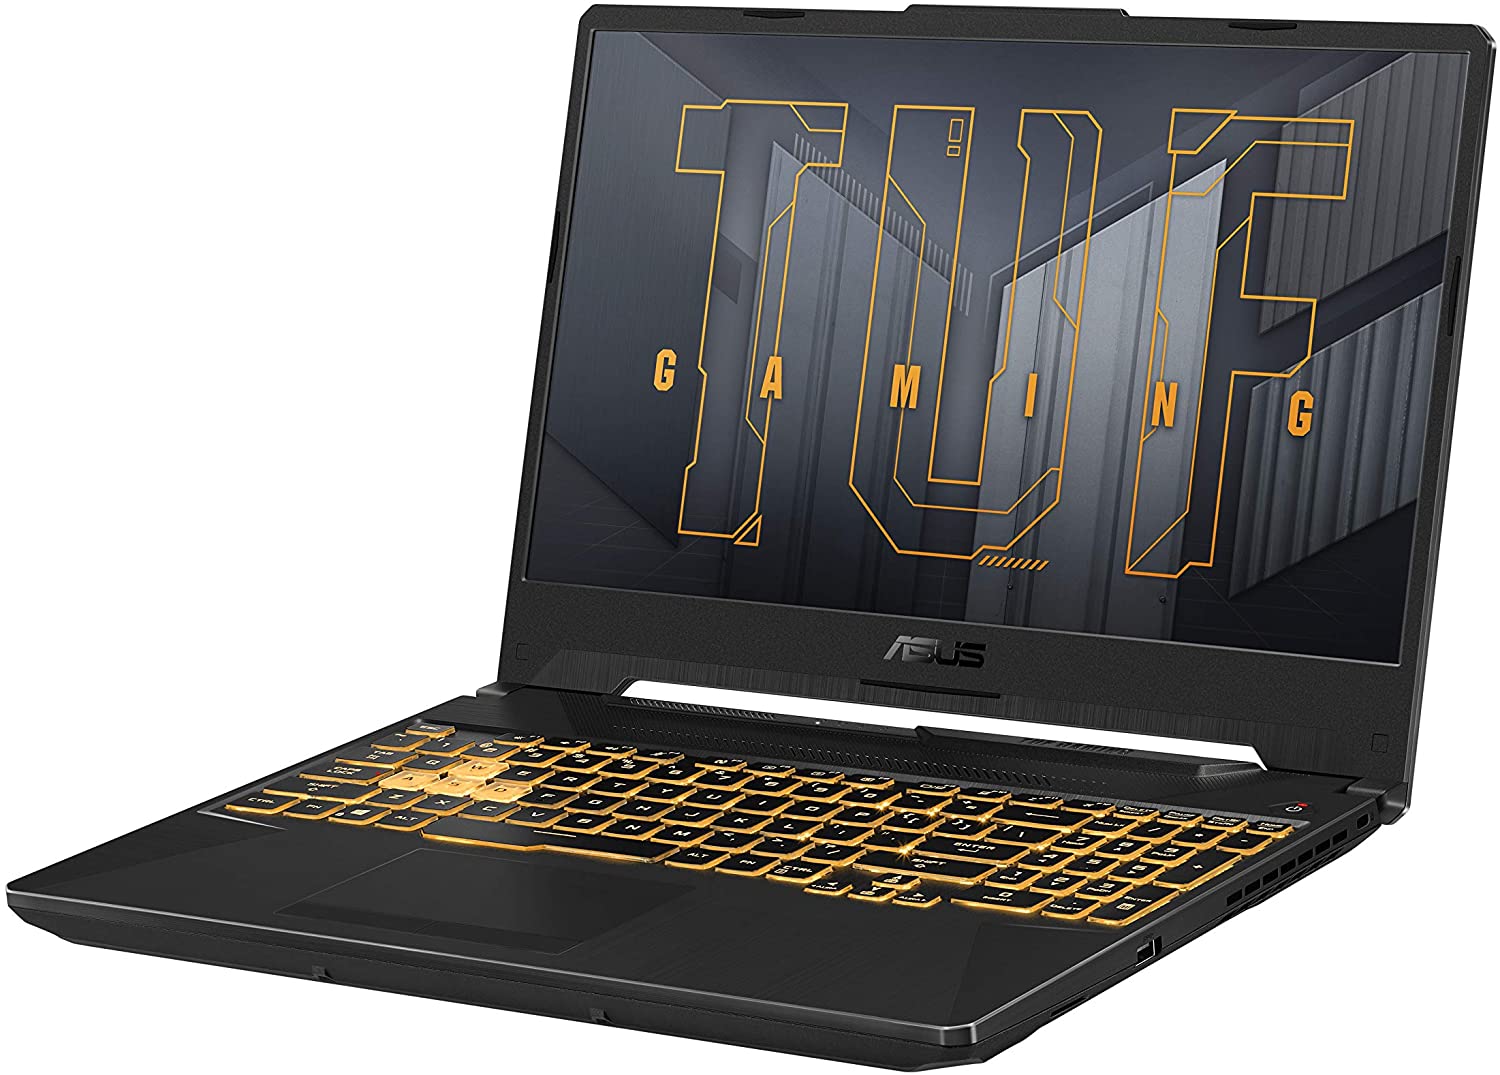 ASUS TUF Gaming A15 (FA506, 2021) - Specs, Tests, and Prices | LaptopMedia.com